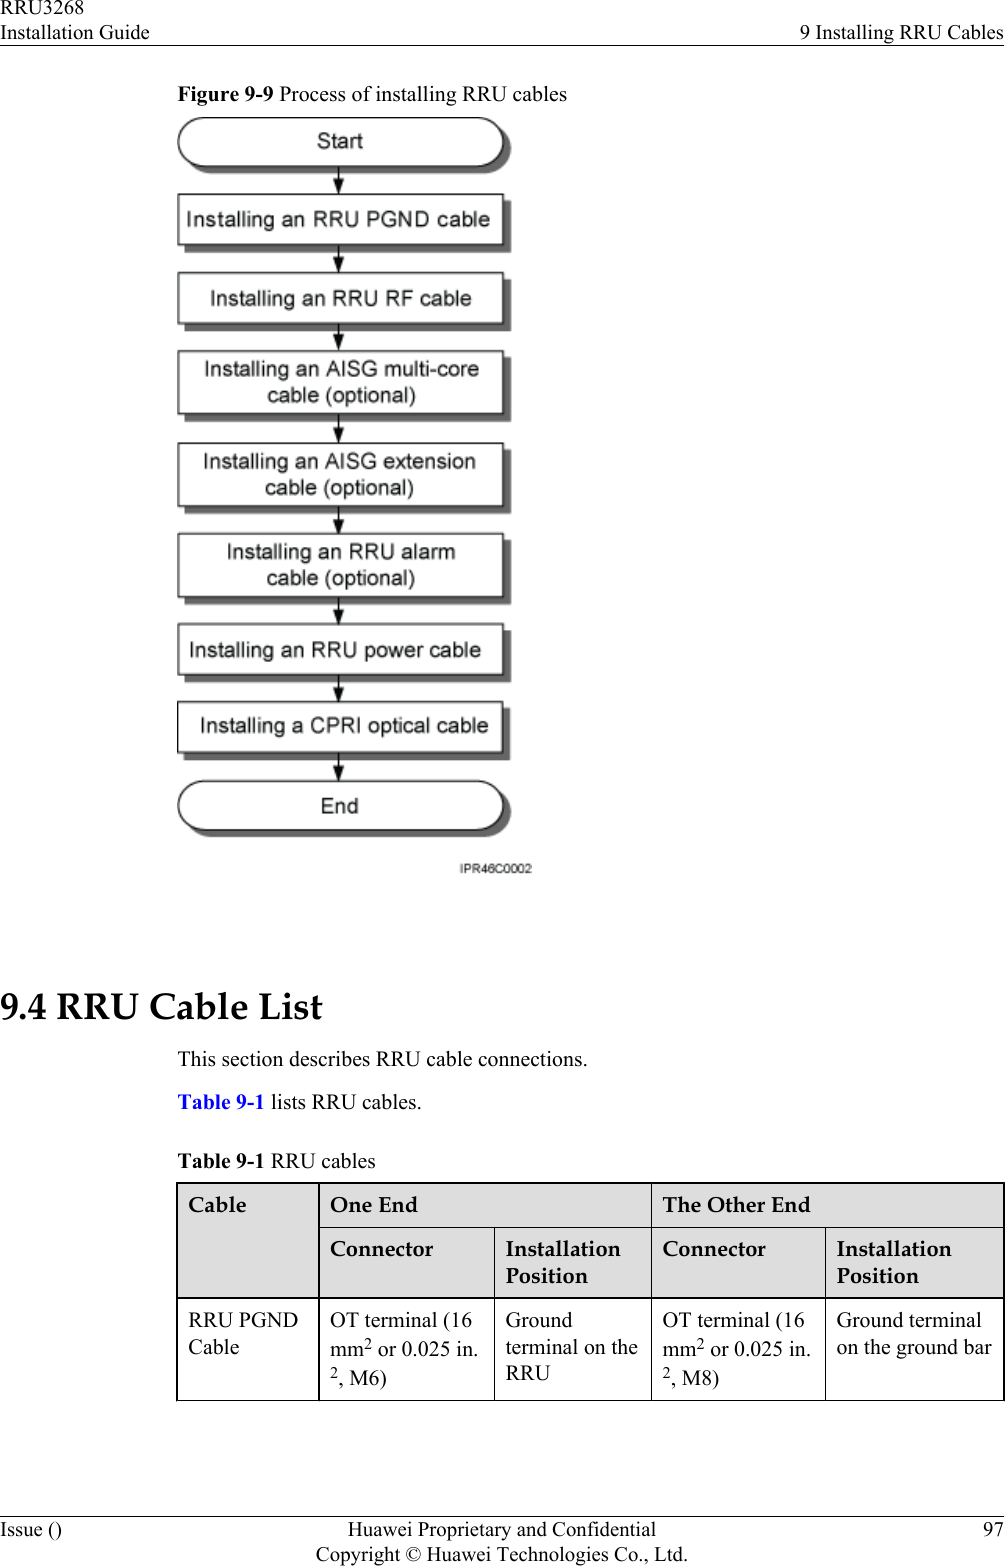 Figure 9-9 Process of installing RRU cables 9.4 RRU Cable ListThis section describes RRU cable connections.Table 9-1 lists RRU cables.Table 9-1 RRU cablesCable One End The Other EndConnector InstallationPositionConnector InstallationPositionRRU PGNDCableOT terminal (16mm2 or 0.025 in.2, M6)Groundterminal on theRRUOT terminal (16mm2 or 0.025 in.2, M8)Ground terminalon the ground barRRU3268Installation Guide 9 Installing RRU CablesIssue () Huawei Proprietary and ConfidentialCopyright © Huawei Technologies Co., Ltd.97